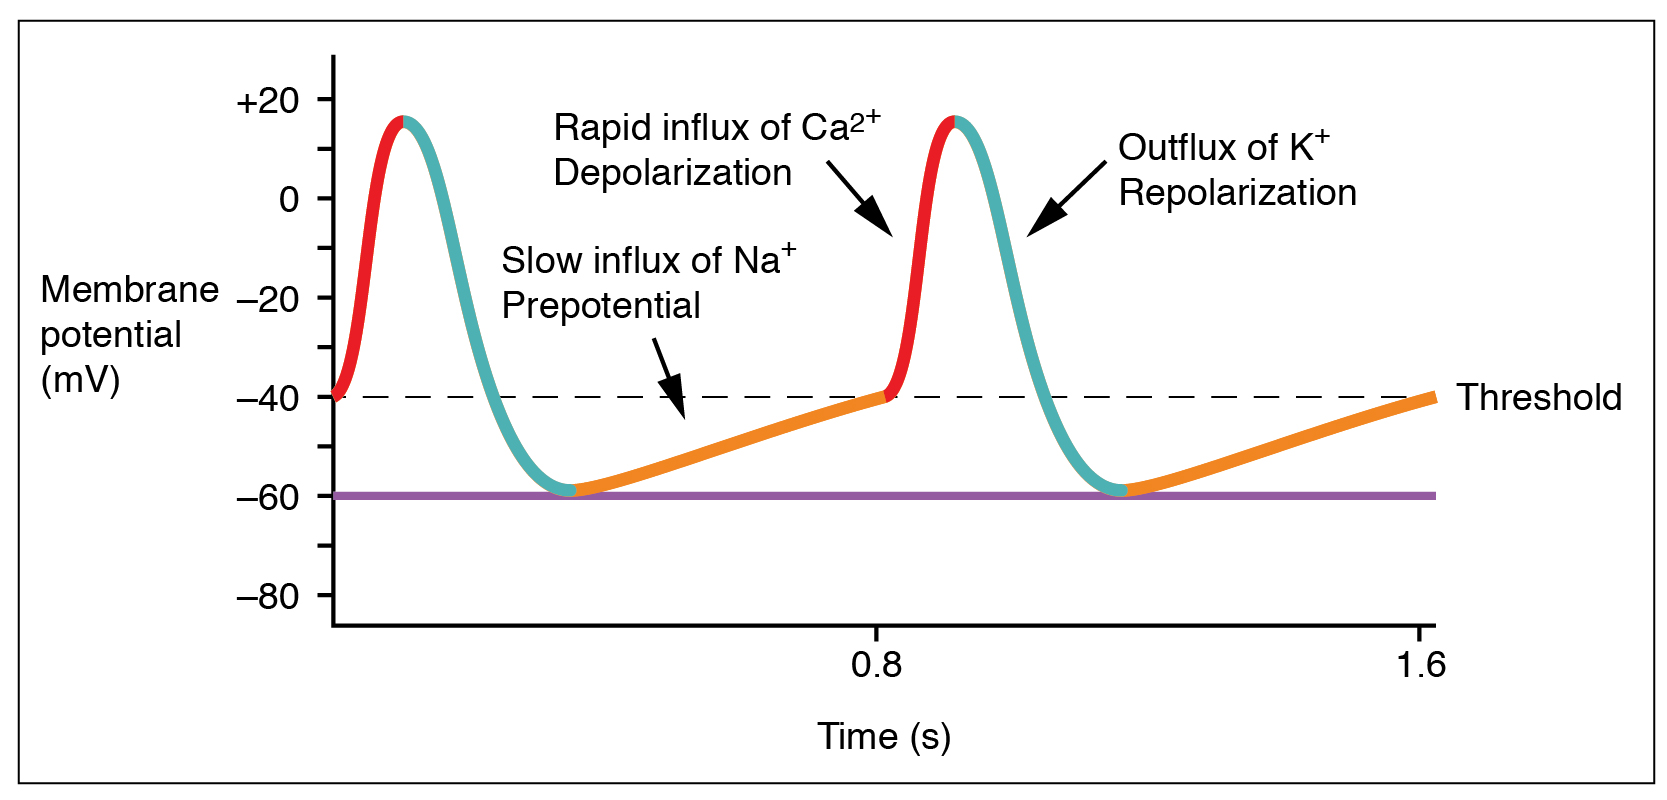 This graph shows the change in membrane potential as a function of time.